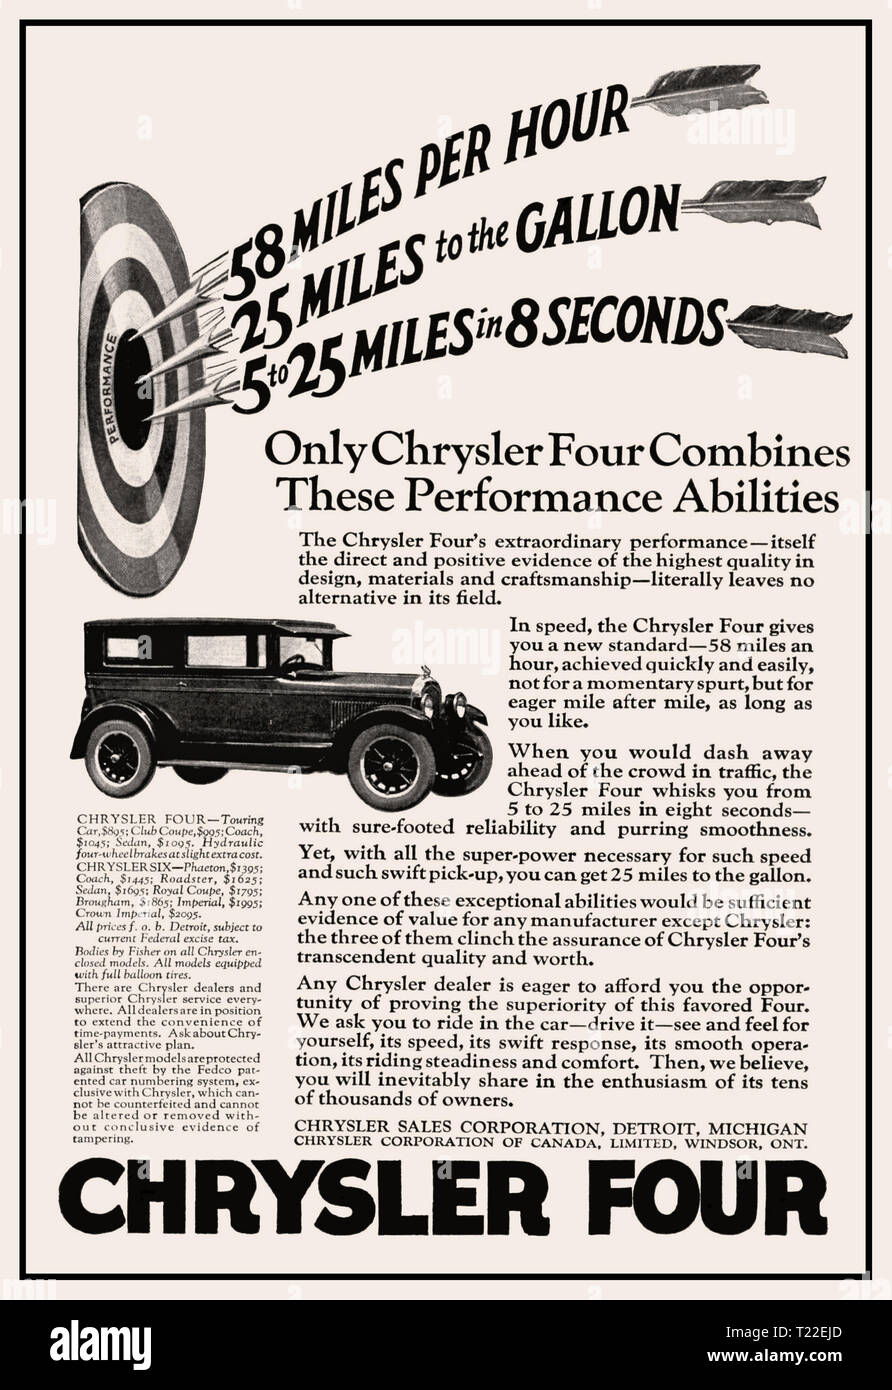 Vintage American 1925 Chrysler Four Advertisement: 58 miles per hour/ 25 miles to the gallon/ 5-25 miles in 8 seconds Michigan America USA Stock Photo